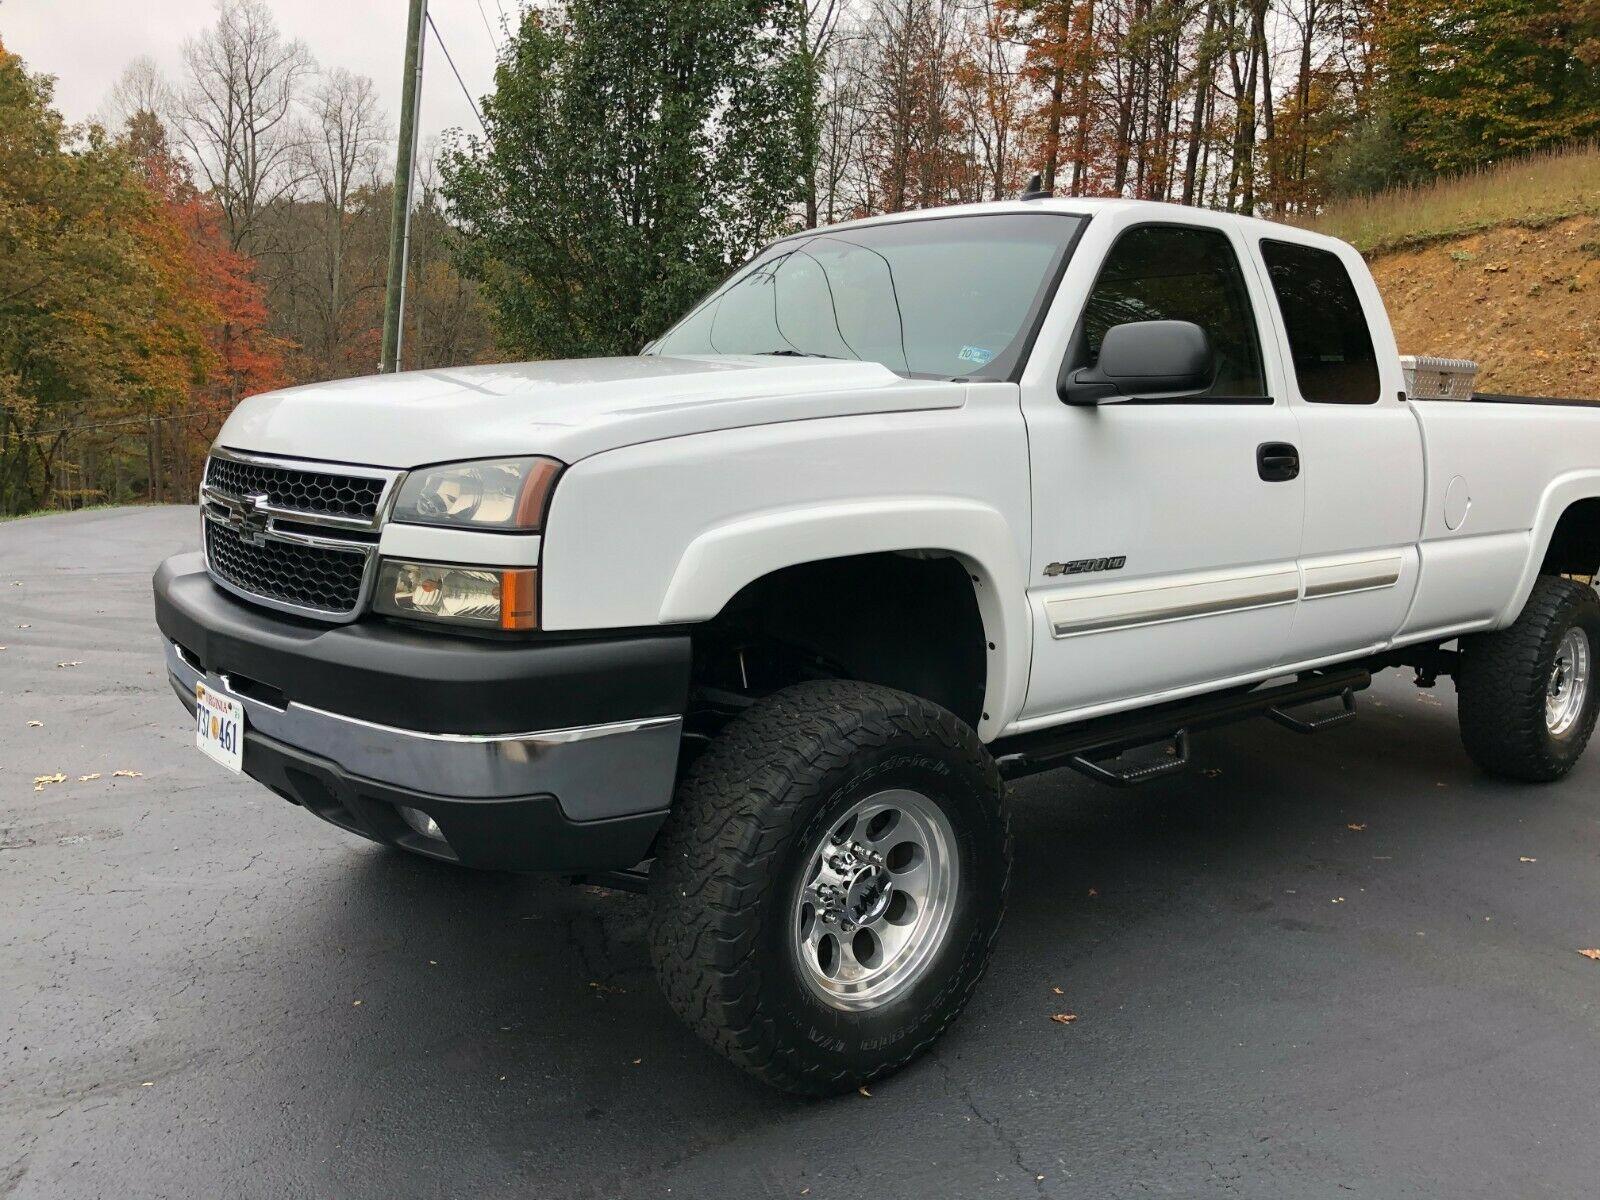 For sale: great shape 2006 Chevrolet Silverado 2500 LT lifted